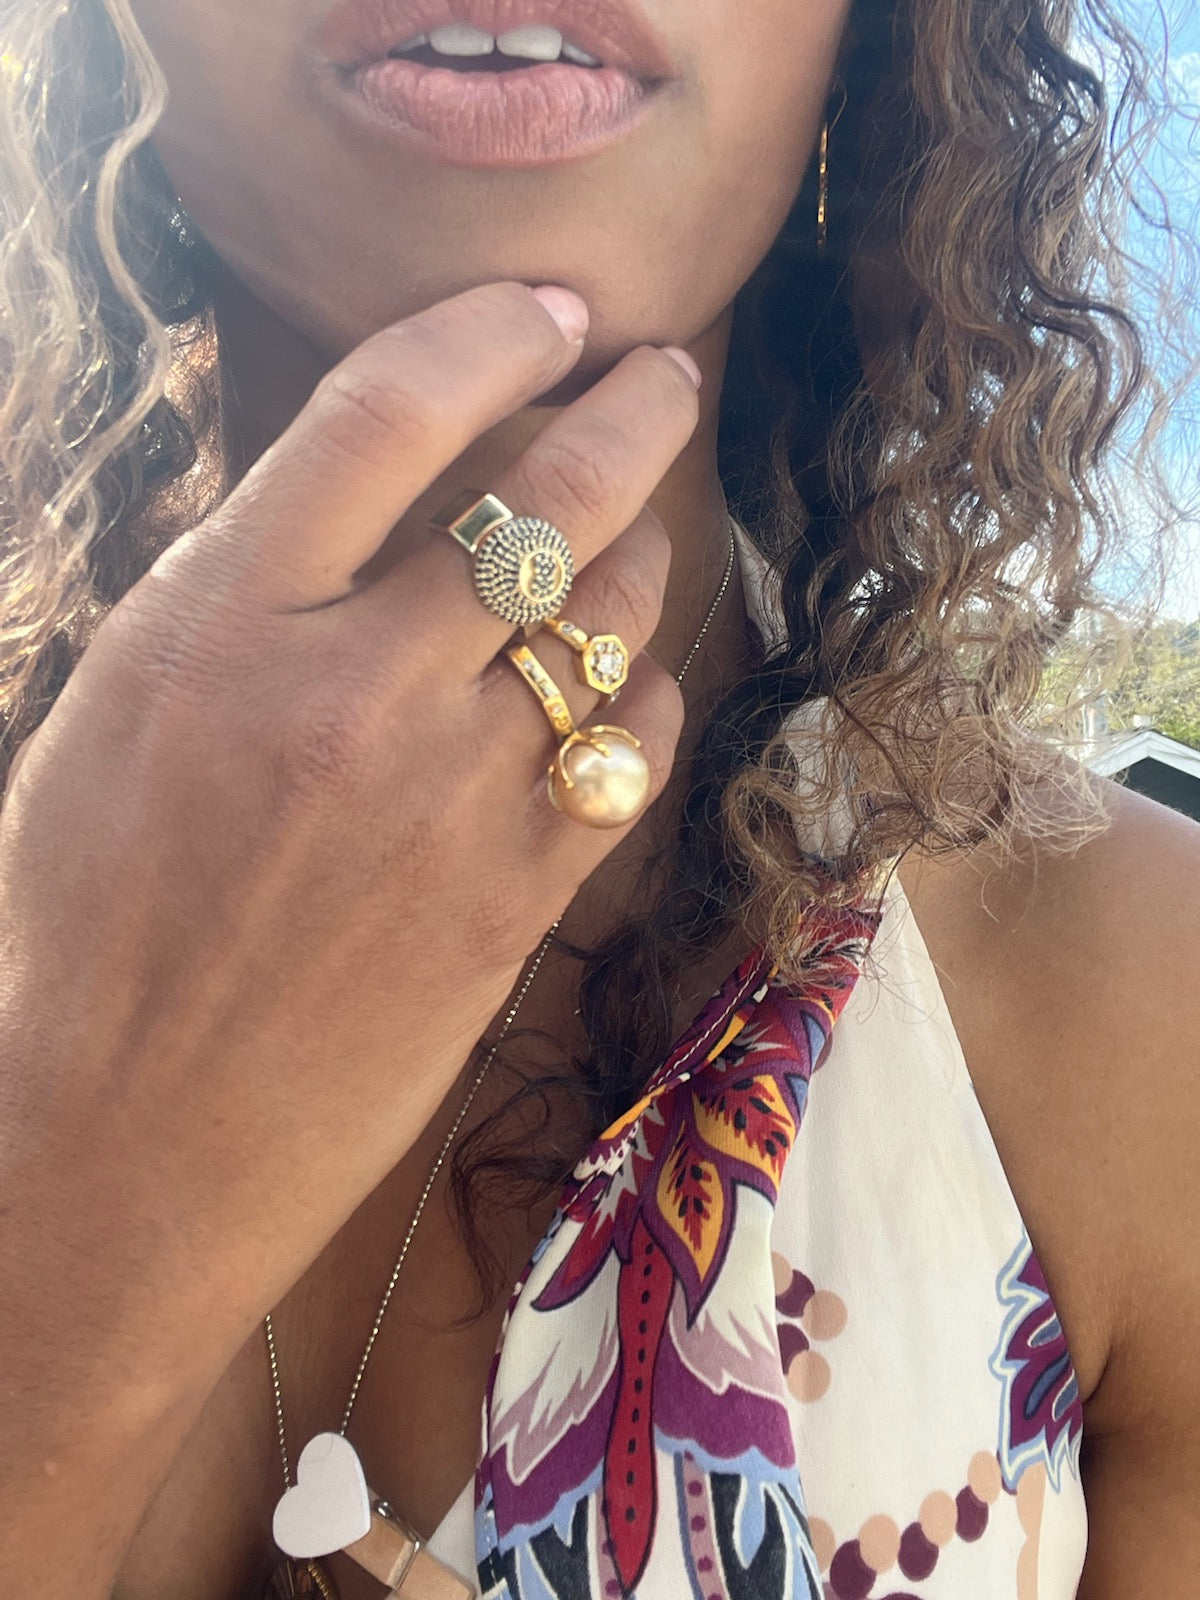 Black woman with long brown hair wearing a the Gold 8 sided octagon infinity ring with an eight ball inscribed in black diamonds from the wandering jewel